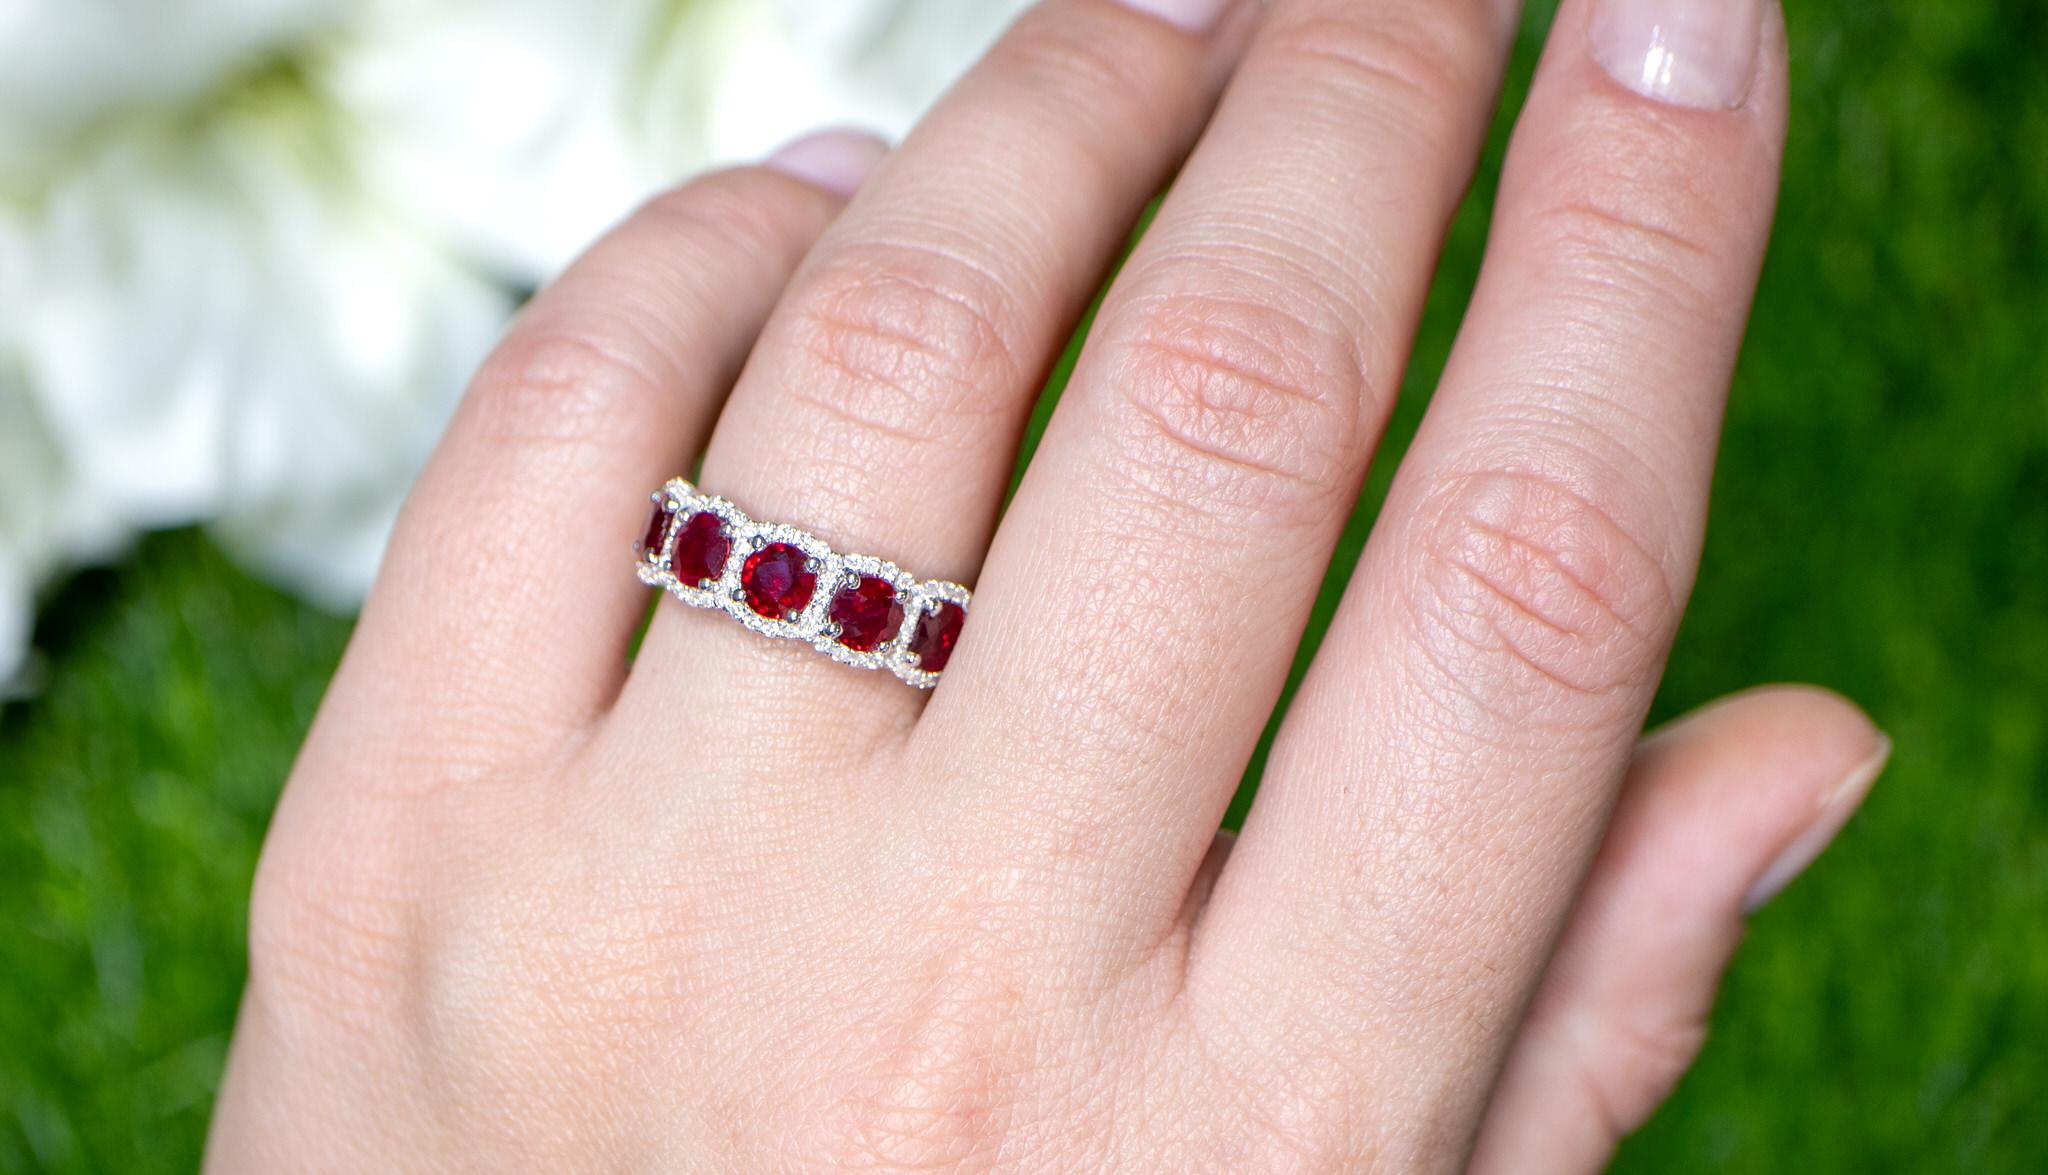 It comes with the Gemological Appraisal by GIA GG/AJP
All Gemstones are Natural
Rubies = 2.12 Carats
Diamonds = 0.34 Carats
Metal: 18K White Gold
Ring Size: 6.25* US
*It can be resized complimentary